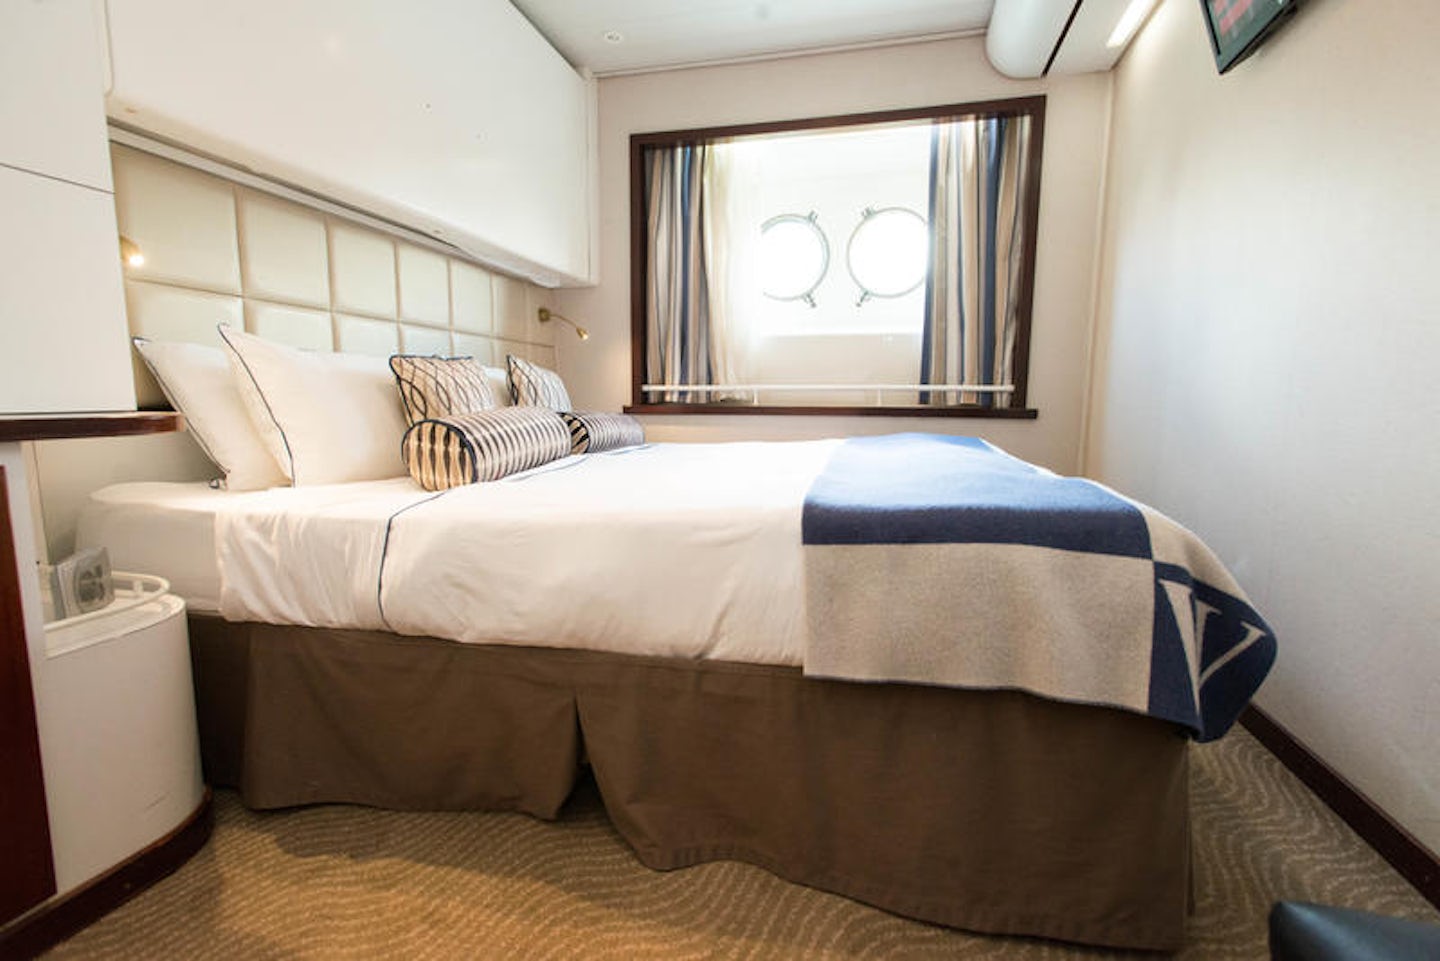 The Ocean-View Cabin (Category B) on Wind Surf